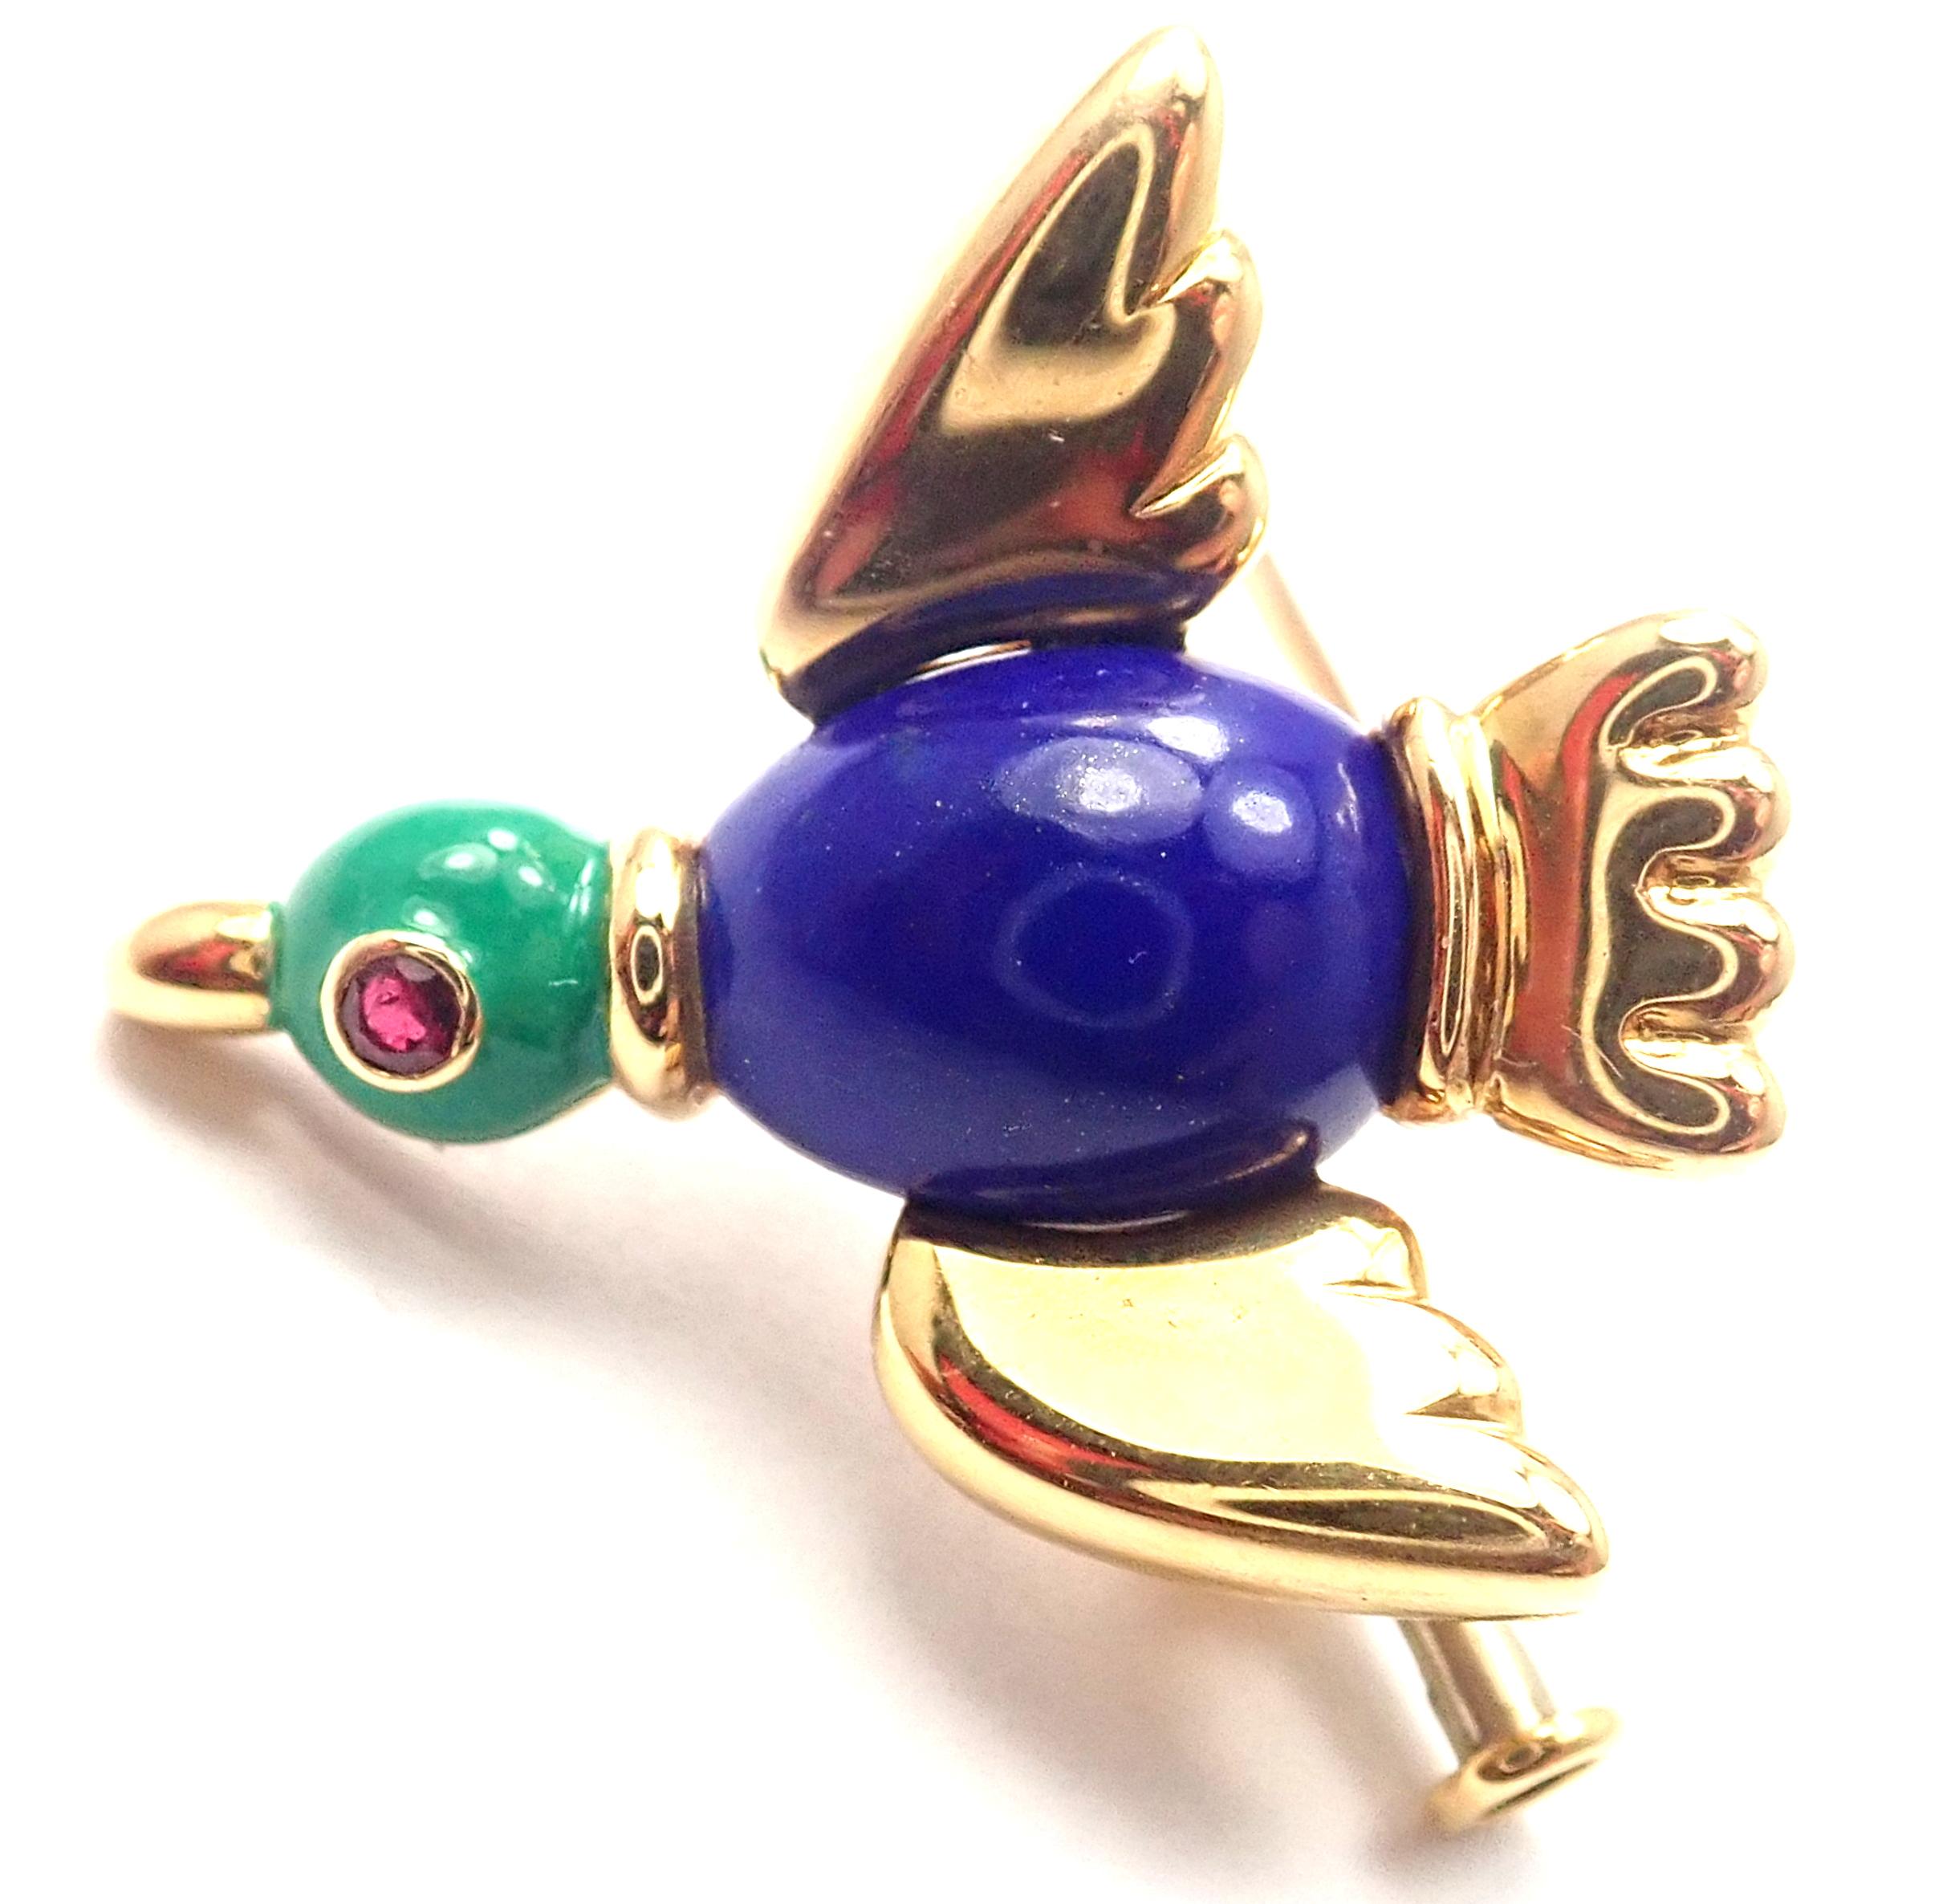 18k Yellow Gold Lapis Lazuli Ruby Brooch Pin by Cartier. 
With 1 lapis lazuli 10mm x 8mm
1 small ruby in the eye
Details: 
Measurements: 23mm x 22mm 
Weight: 6.8 grams 
Stamped Hallmarks: Cartier 750 1991 9XXXXX(serial number omitted)
*Free Shipping